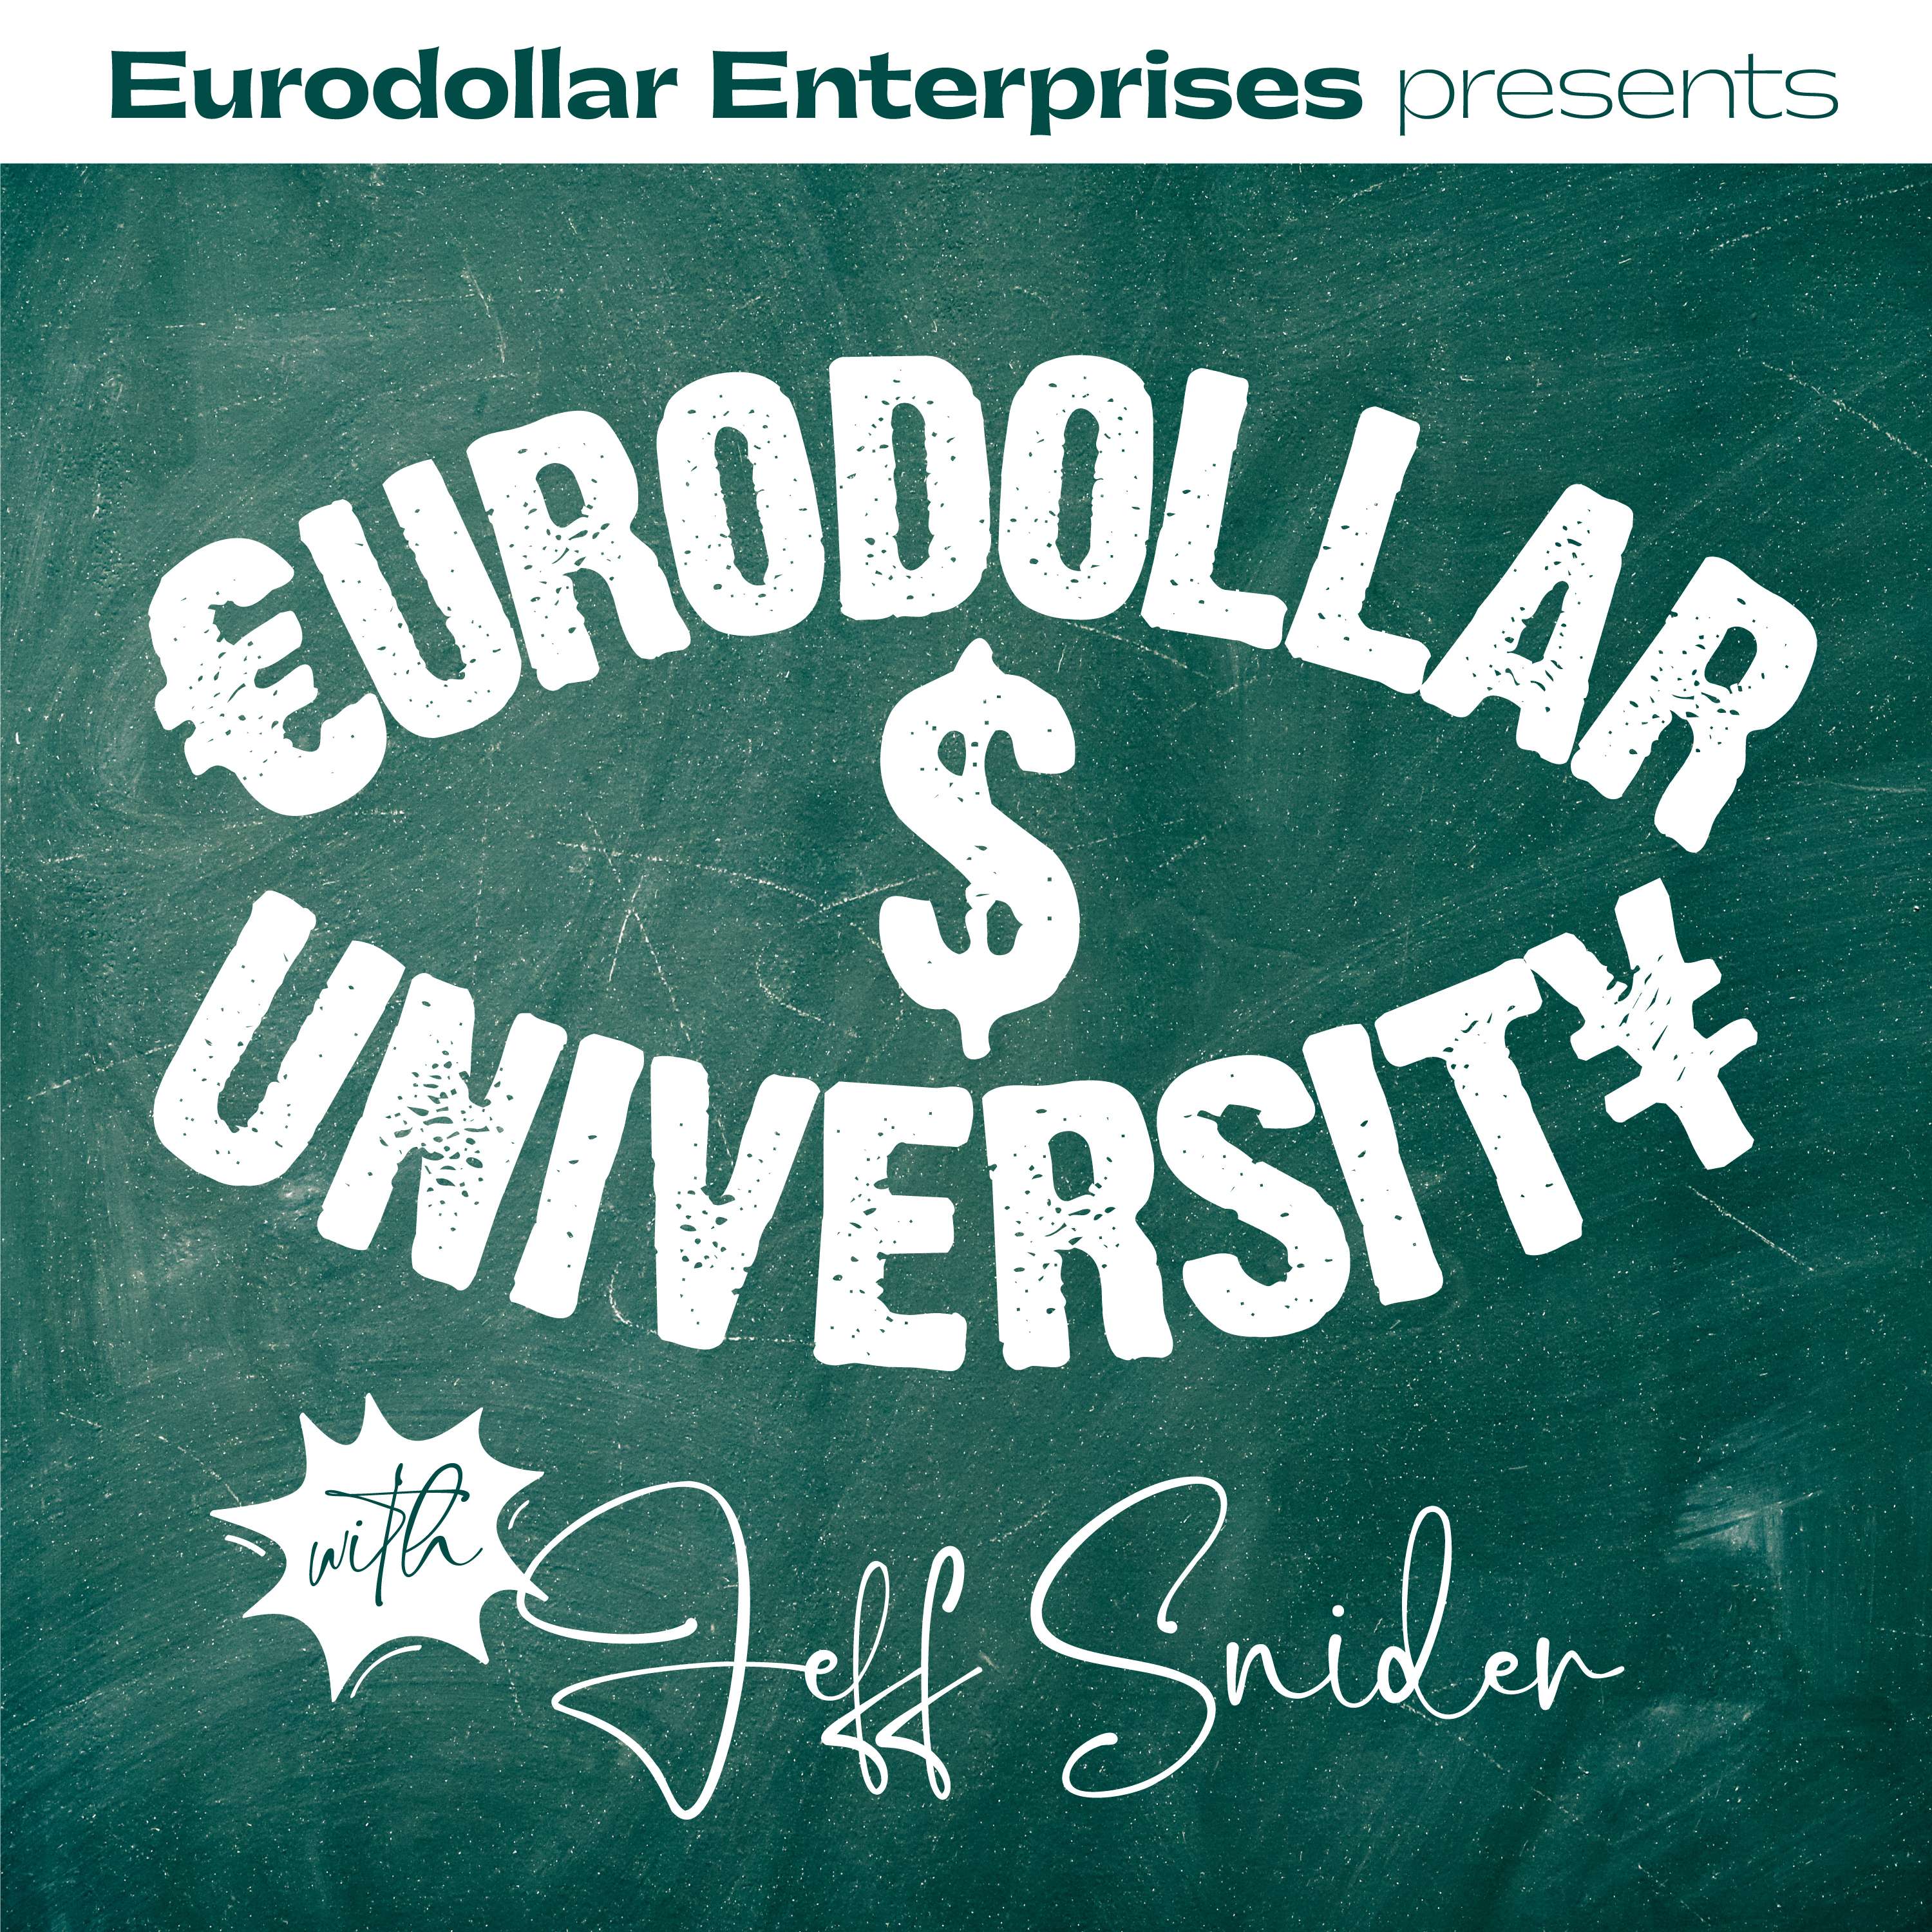 What Mohamed EL-ERIAN got SO wrong about the Economy [Eurodollar University, Ep. 193]